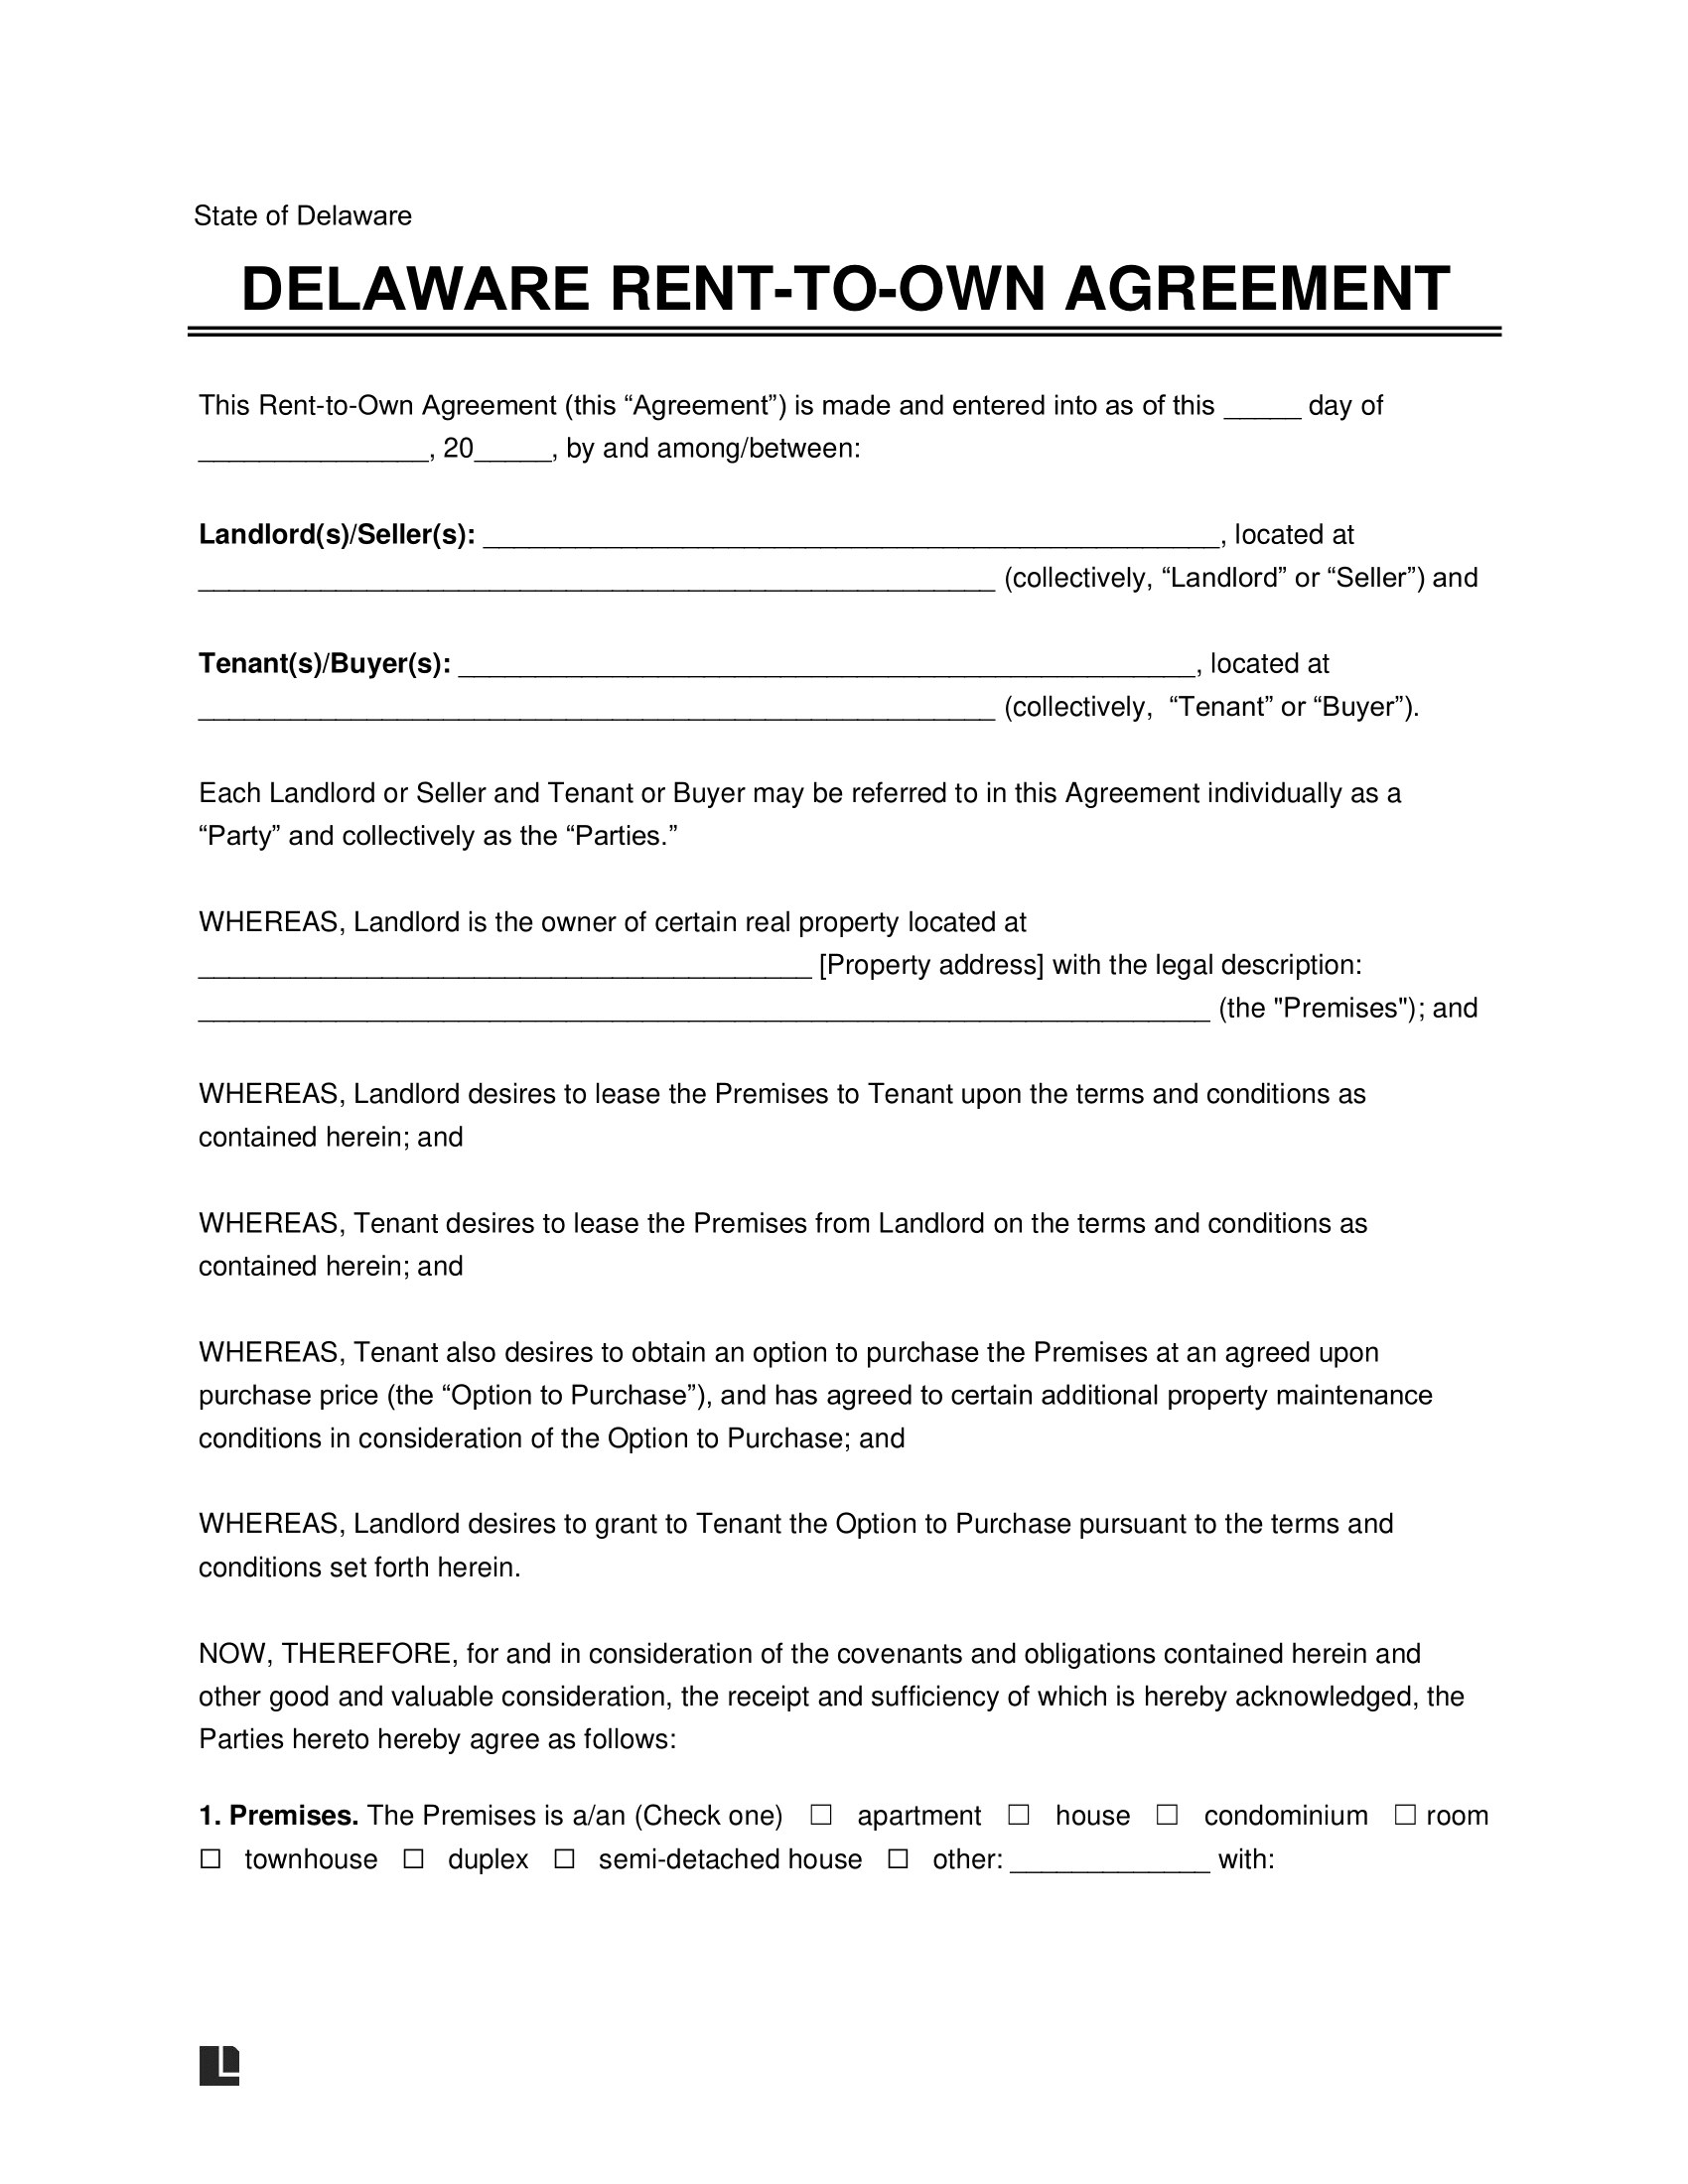 Delaware Lease-to-Own Option-to-Purchase Agreement